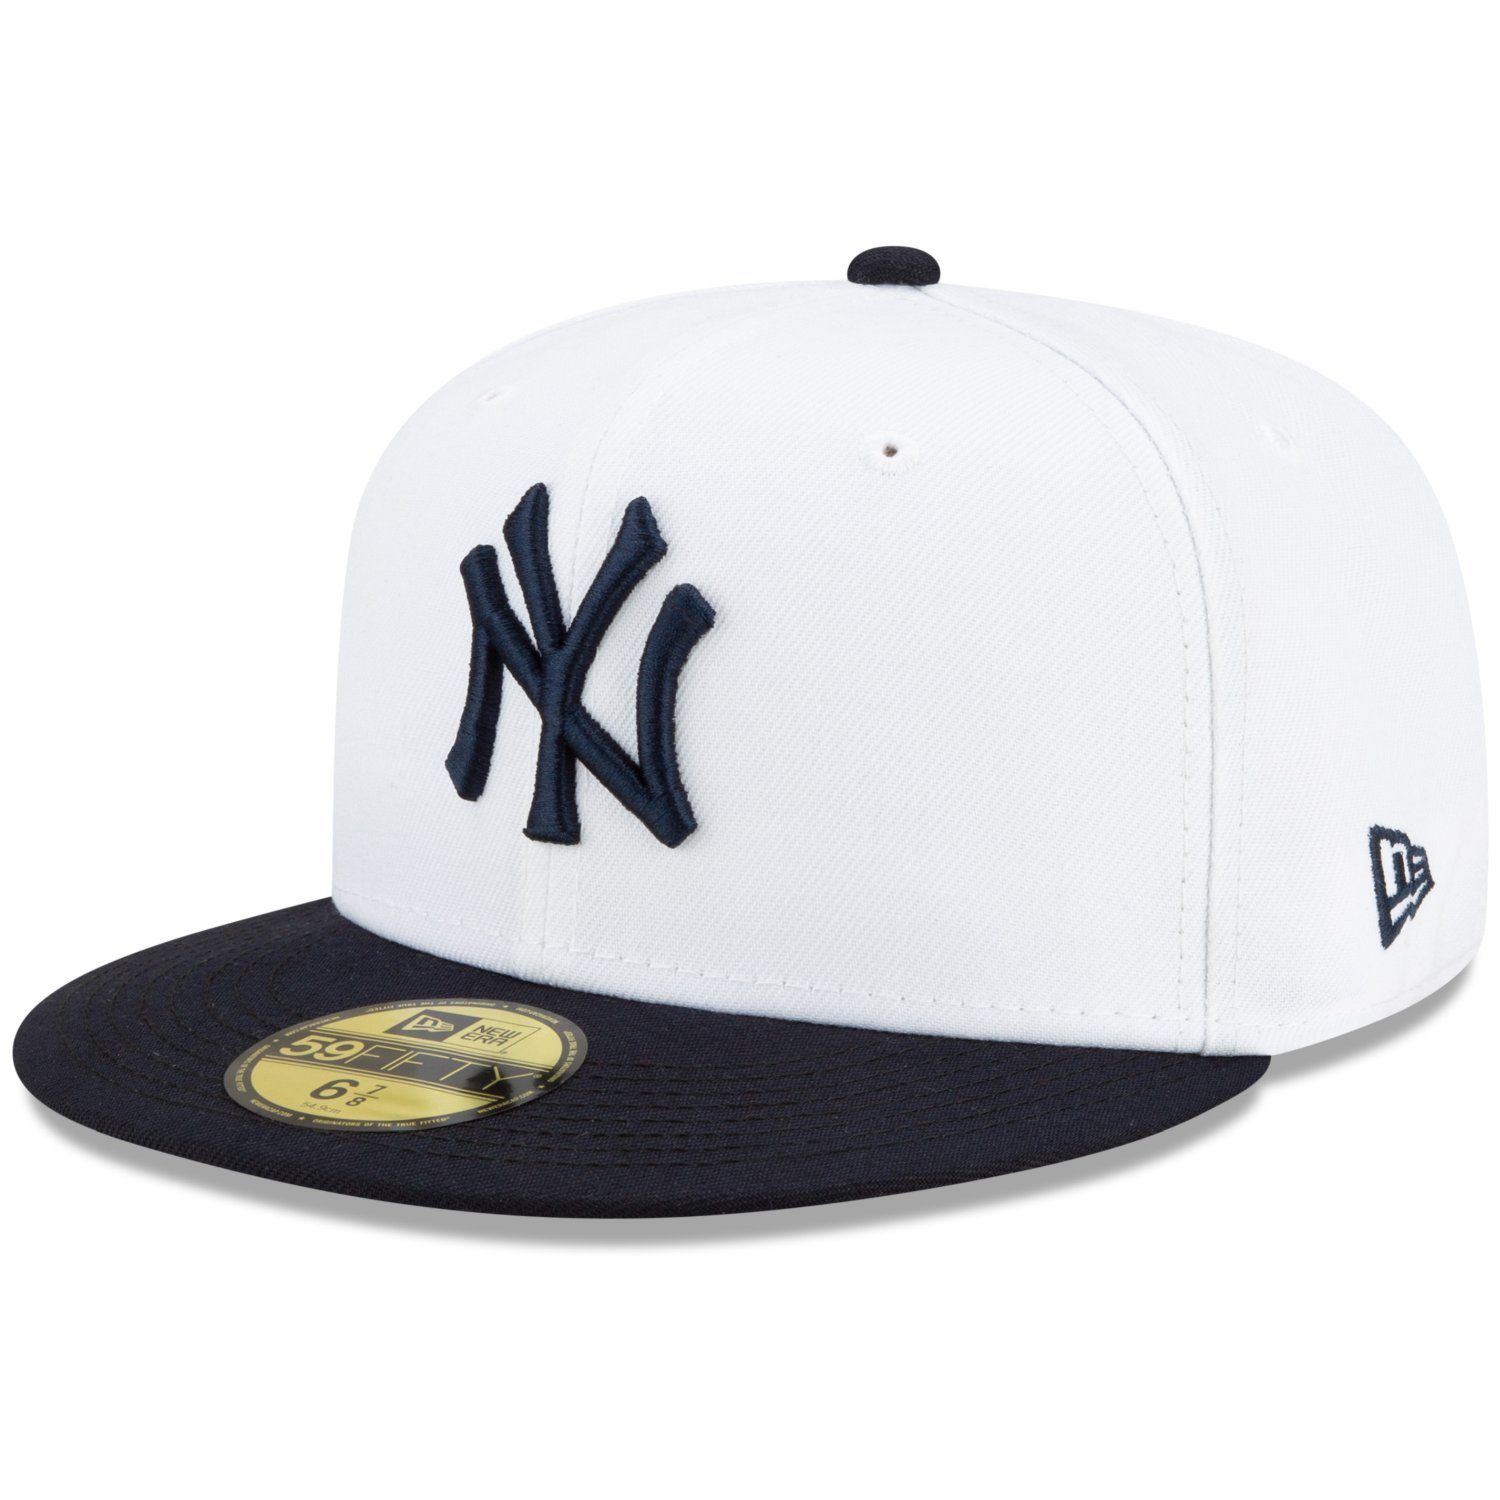 Yankees Fitted SERIES 1996 WORLD 59Fifty NY New Era Cap